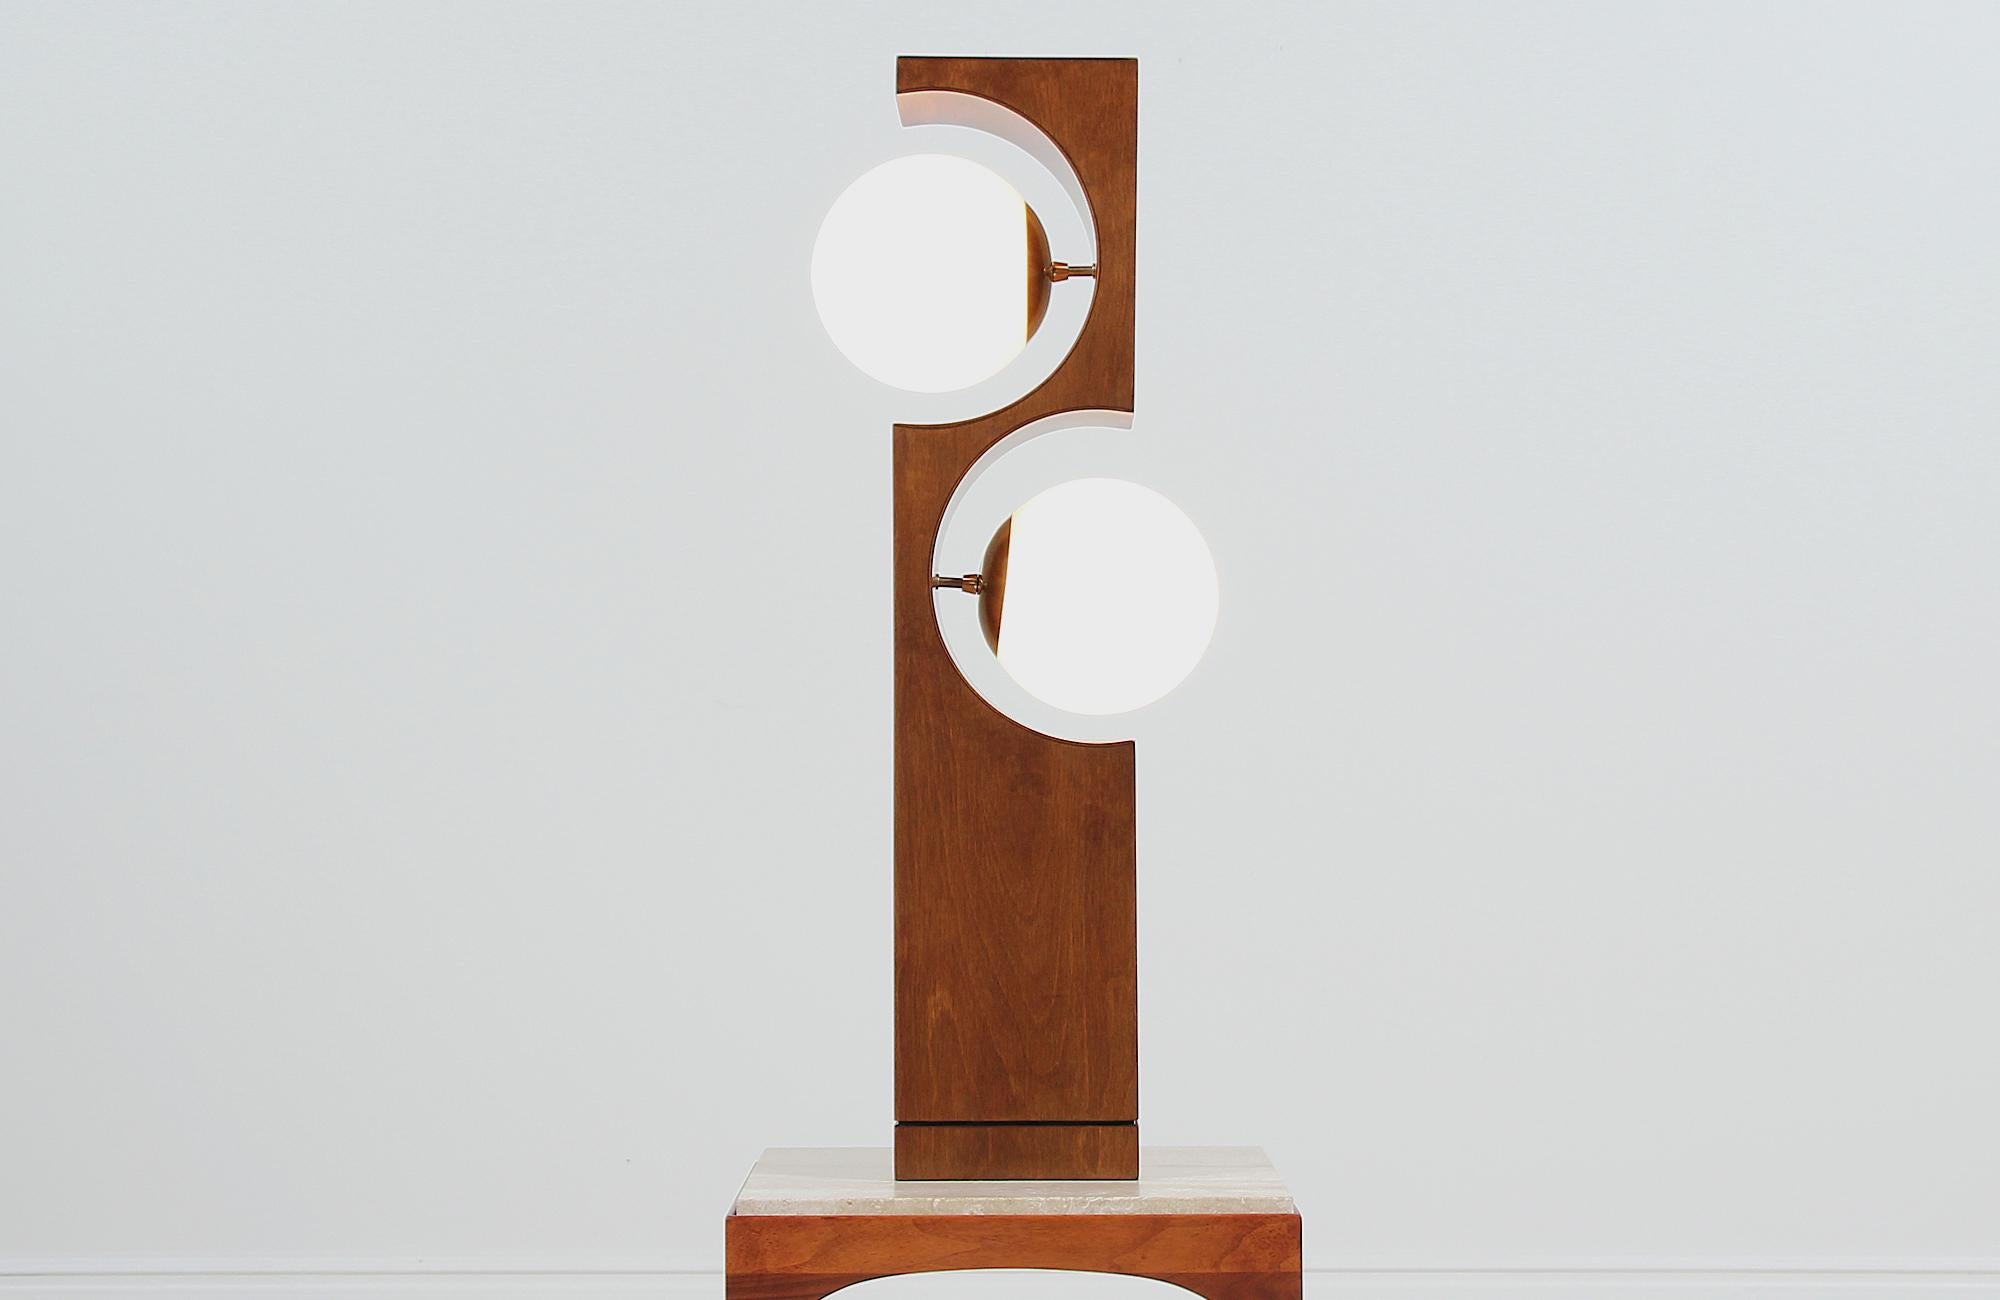 Mid-Century Modern table lamp designed and manufactured by Modeline Lamp Co. of California in the United States, circa 1960s. This sculptural walnut wood design shows bold curves and clean lines on its block base. Two new glass globes are supported